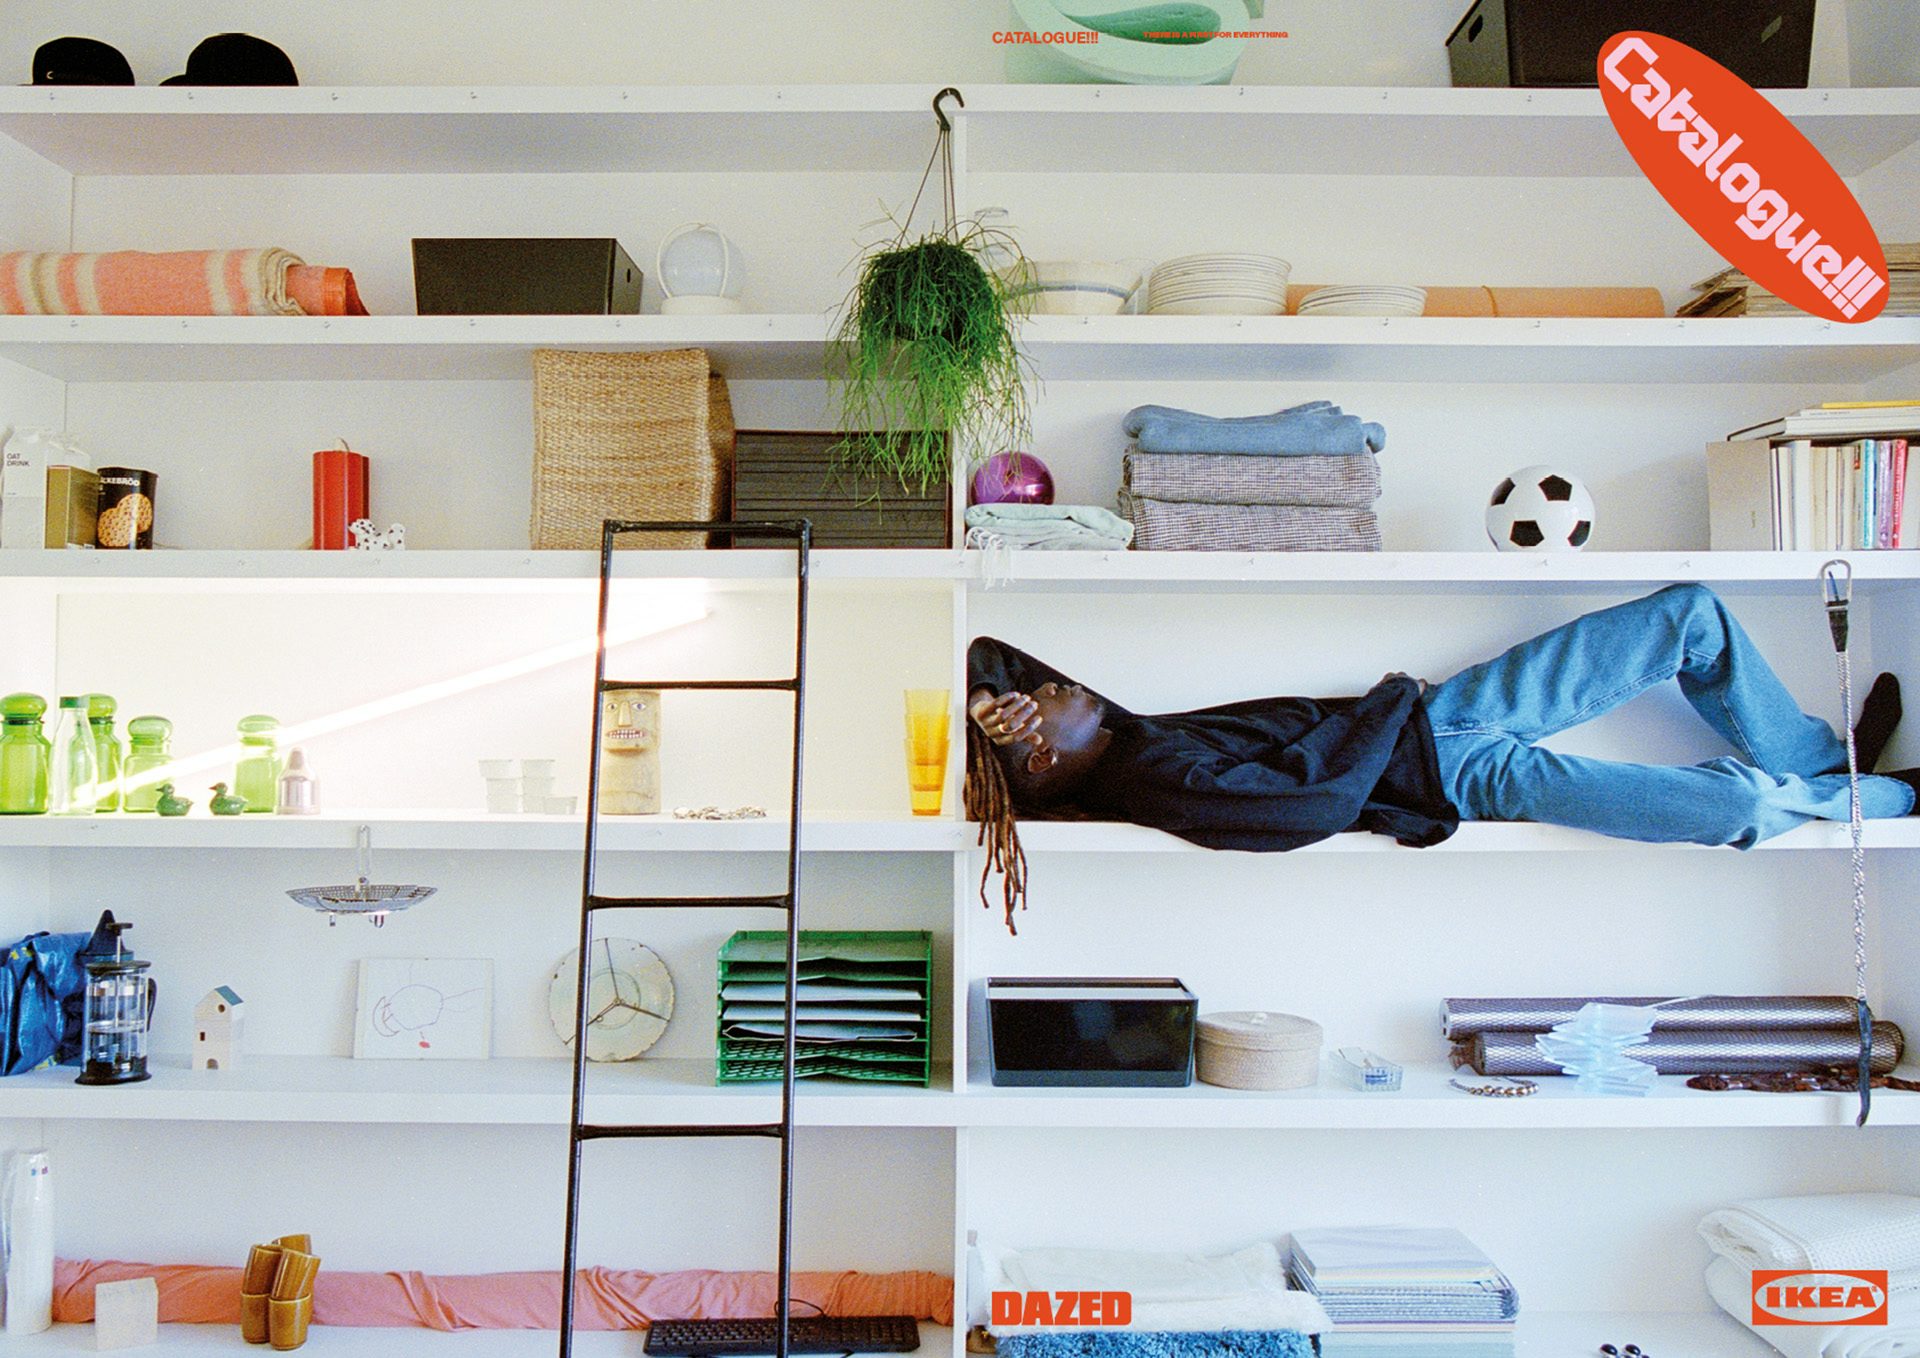 Photograph from Dazed and Ikea's zine showing a person lying on a shelf within a shelving unit inset into a wall